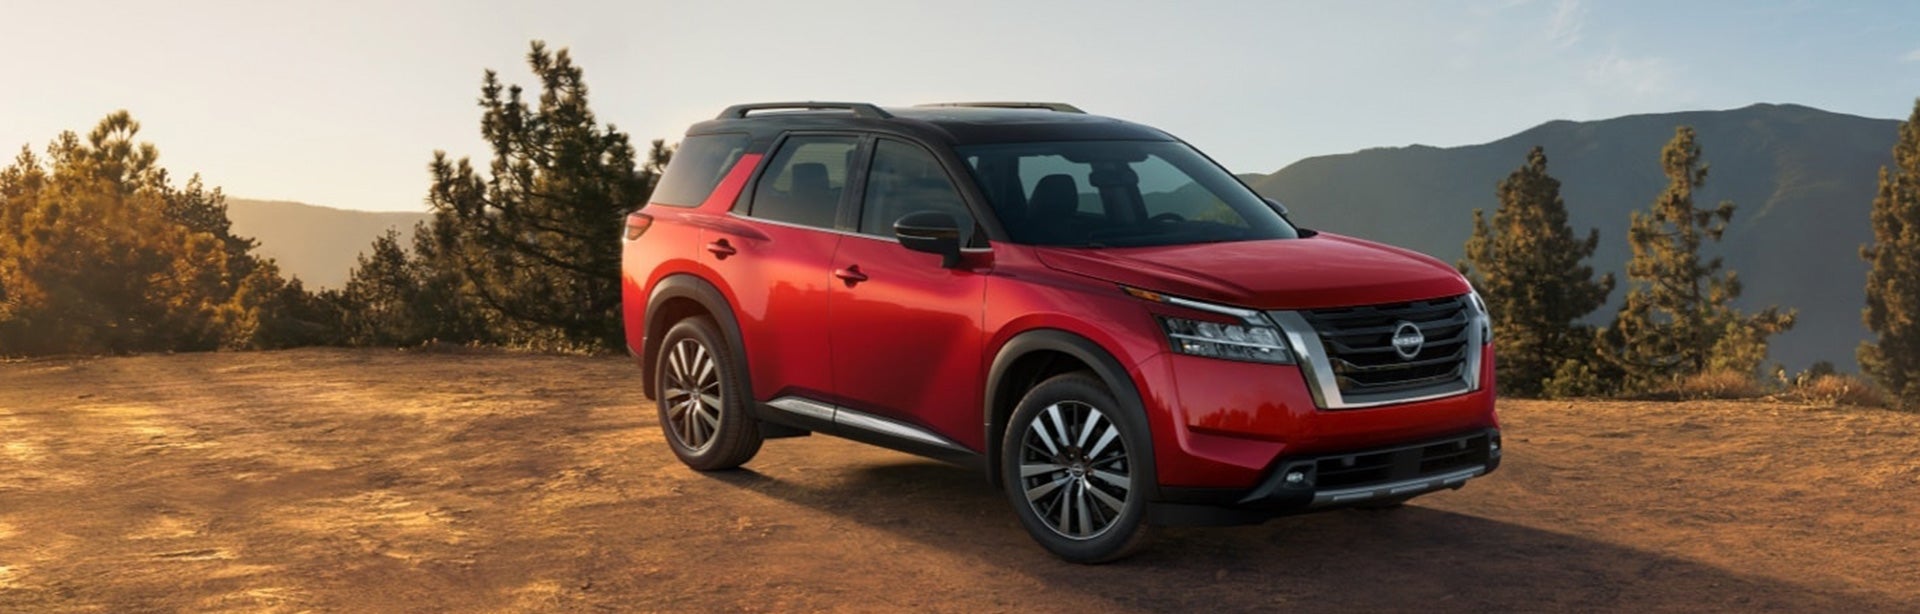 Coming Soon: The 2022 Nissan Pathfinder